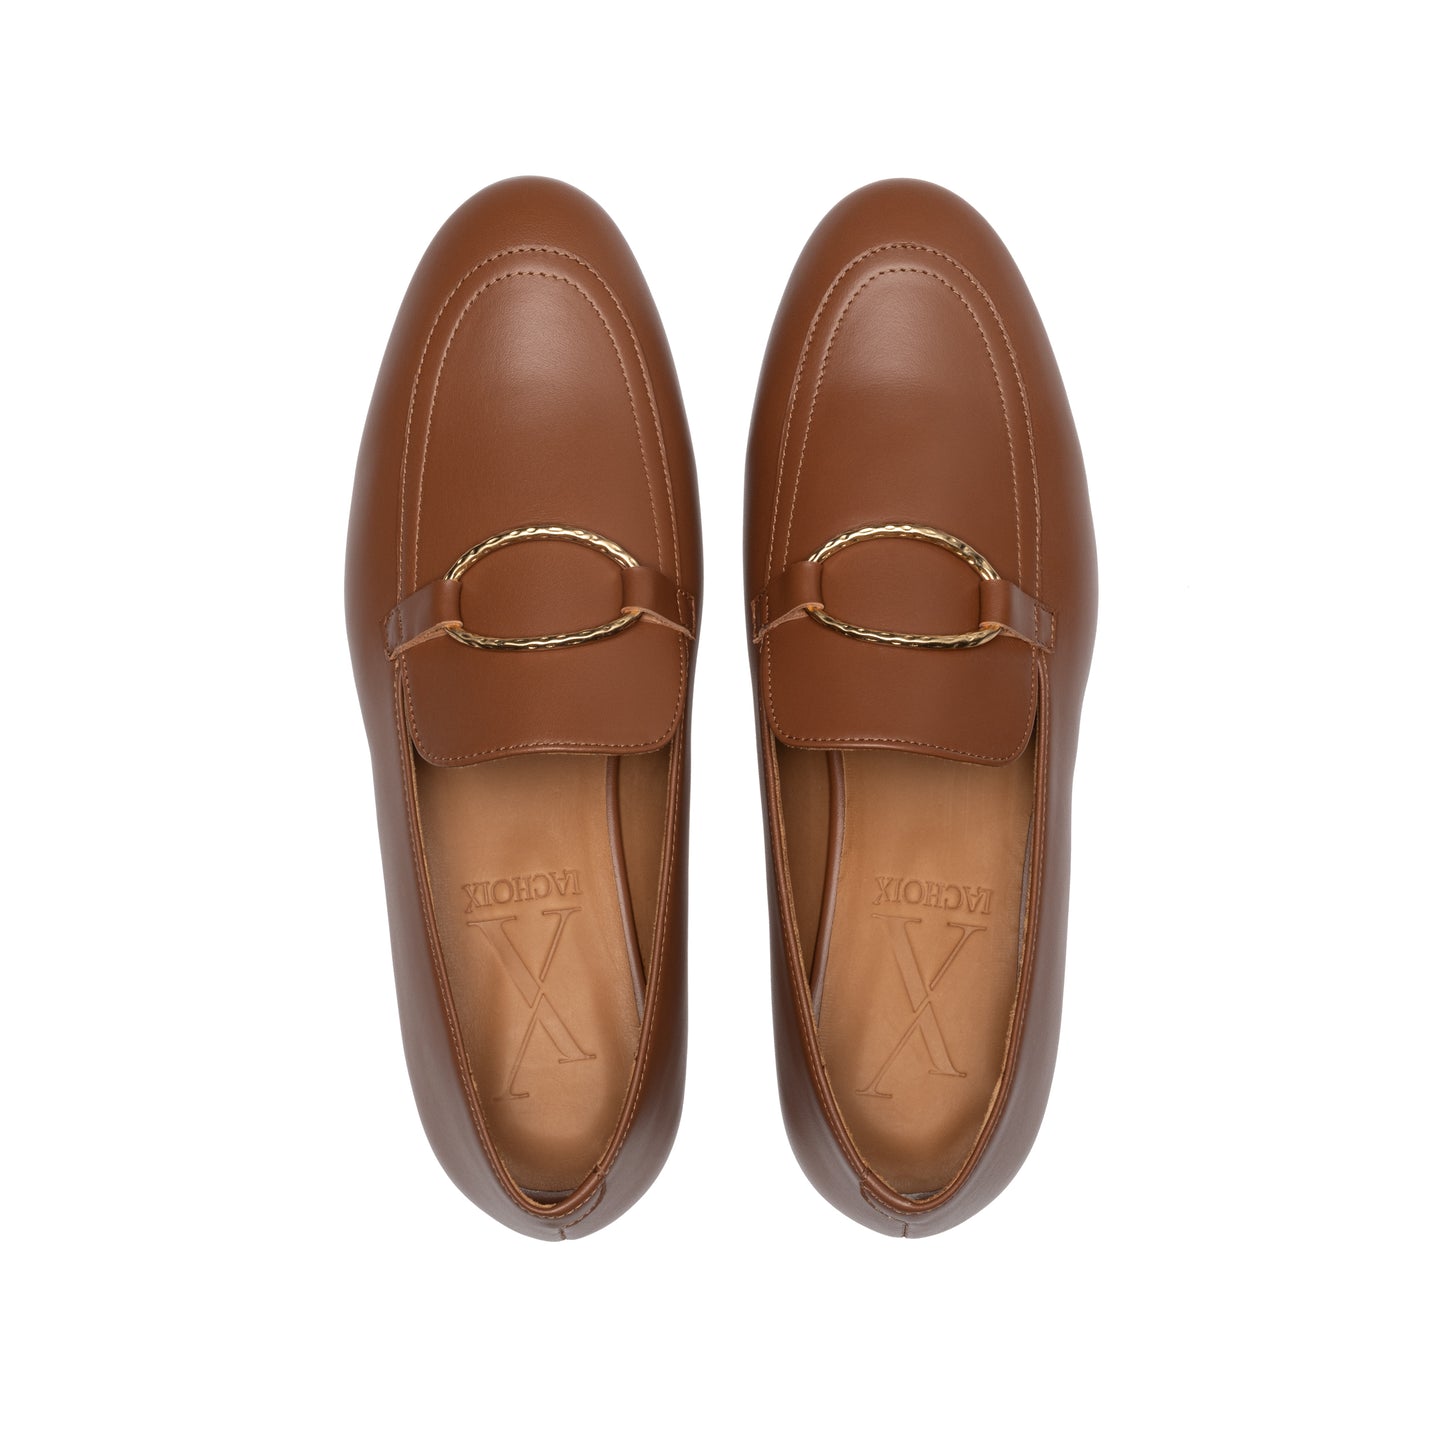 Cognac Tomboy Chic Loafers